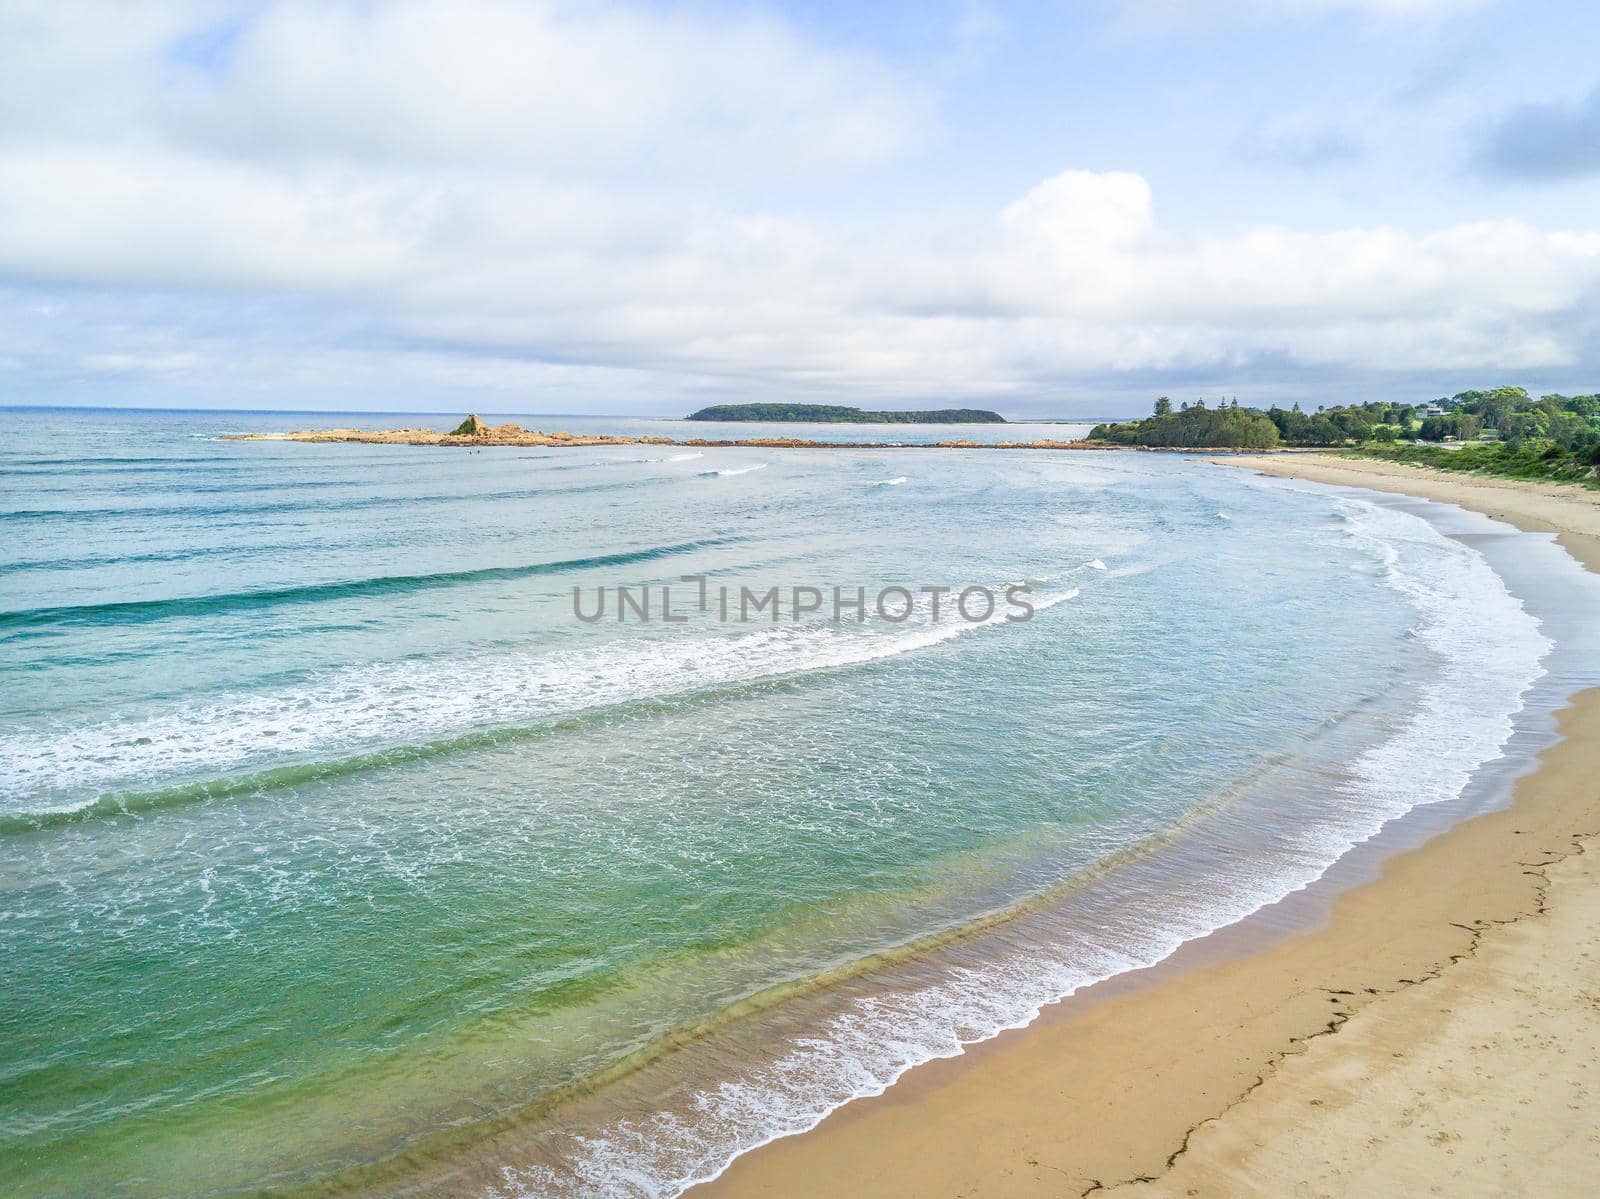 Scenic beach views to Mossy Point Australia with pretty sky with soft fluffy clouds and gentle waves lap the shore